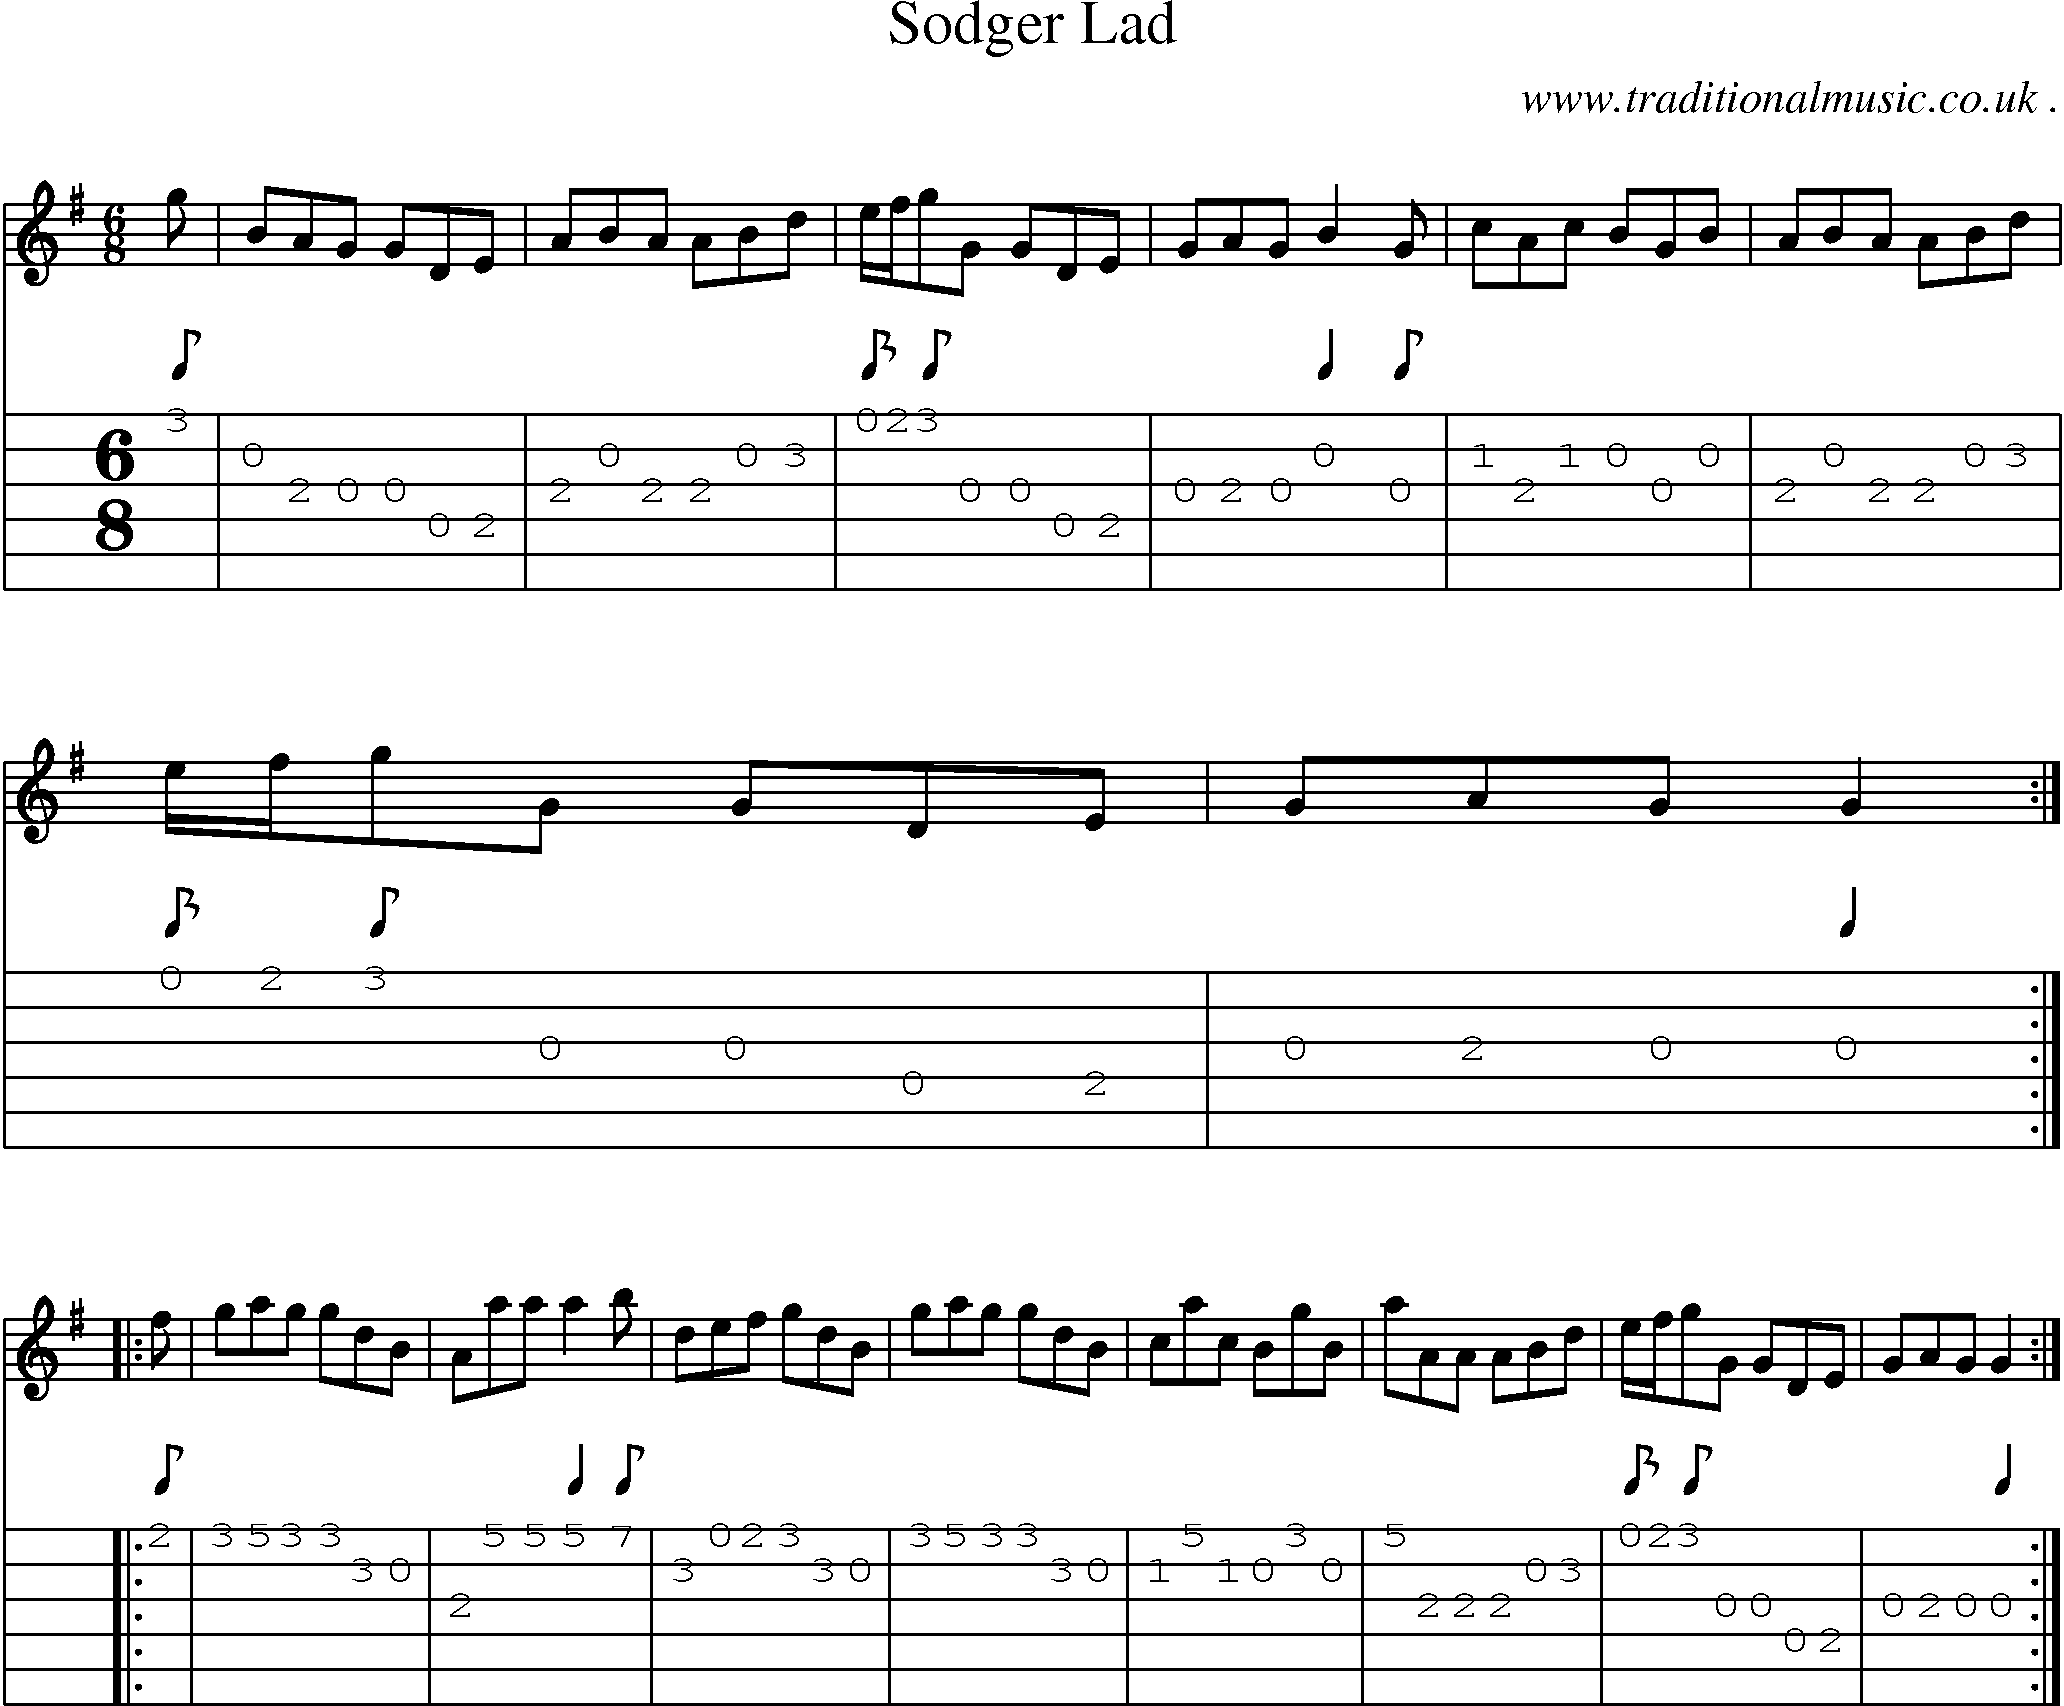 Sheet-music  score, Chords and Guitar Tabs for Sodger Lad